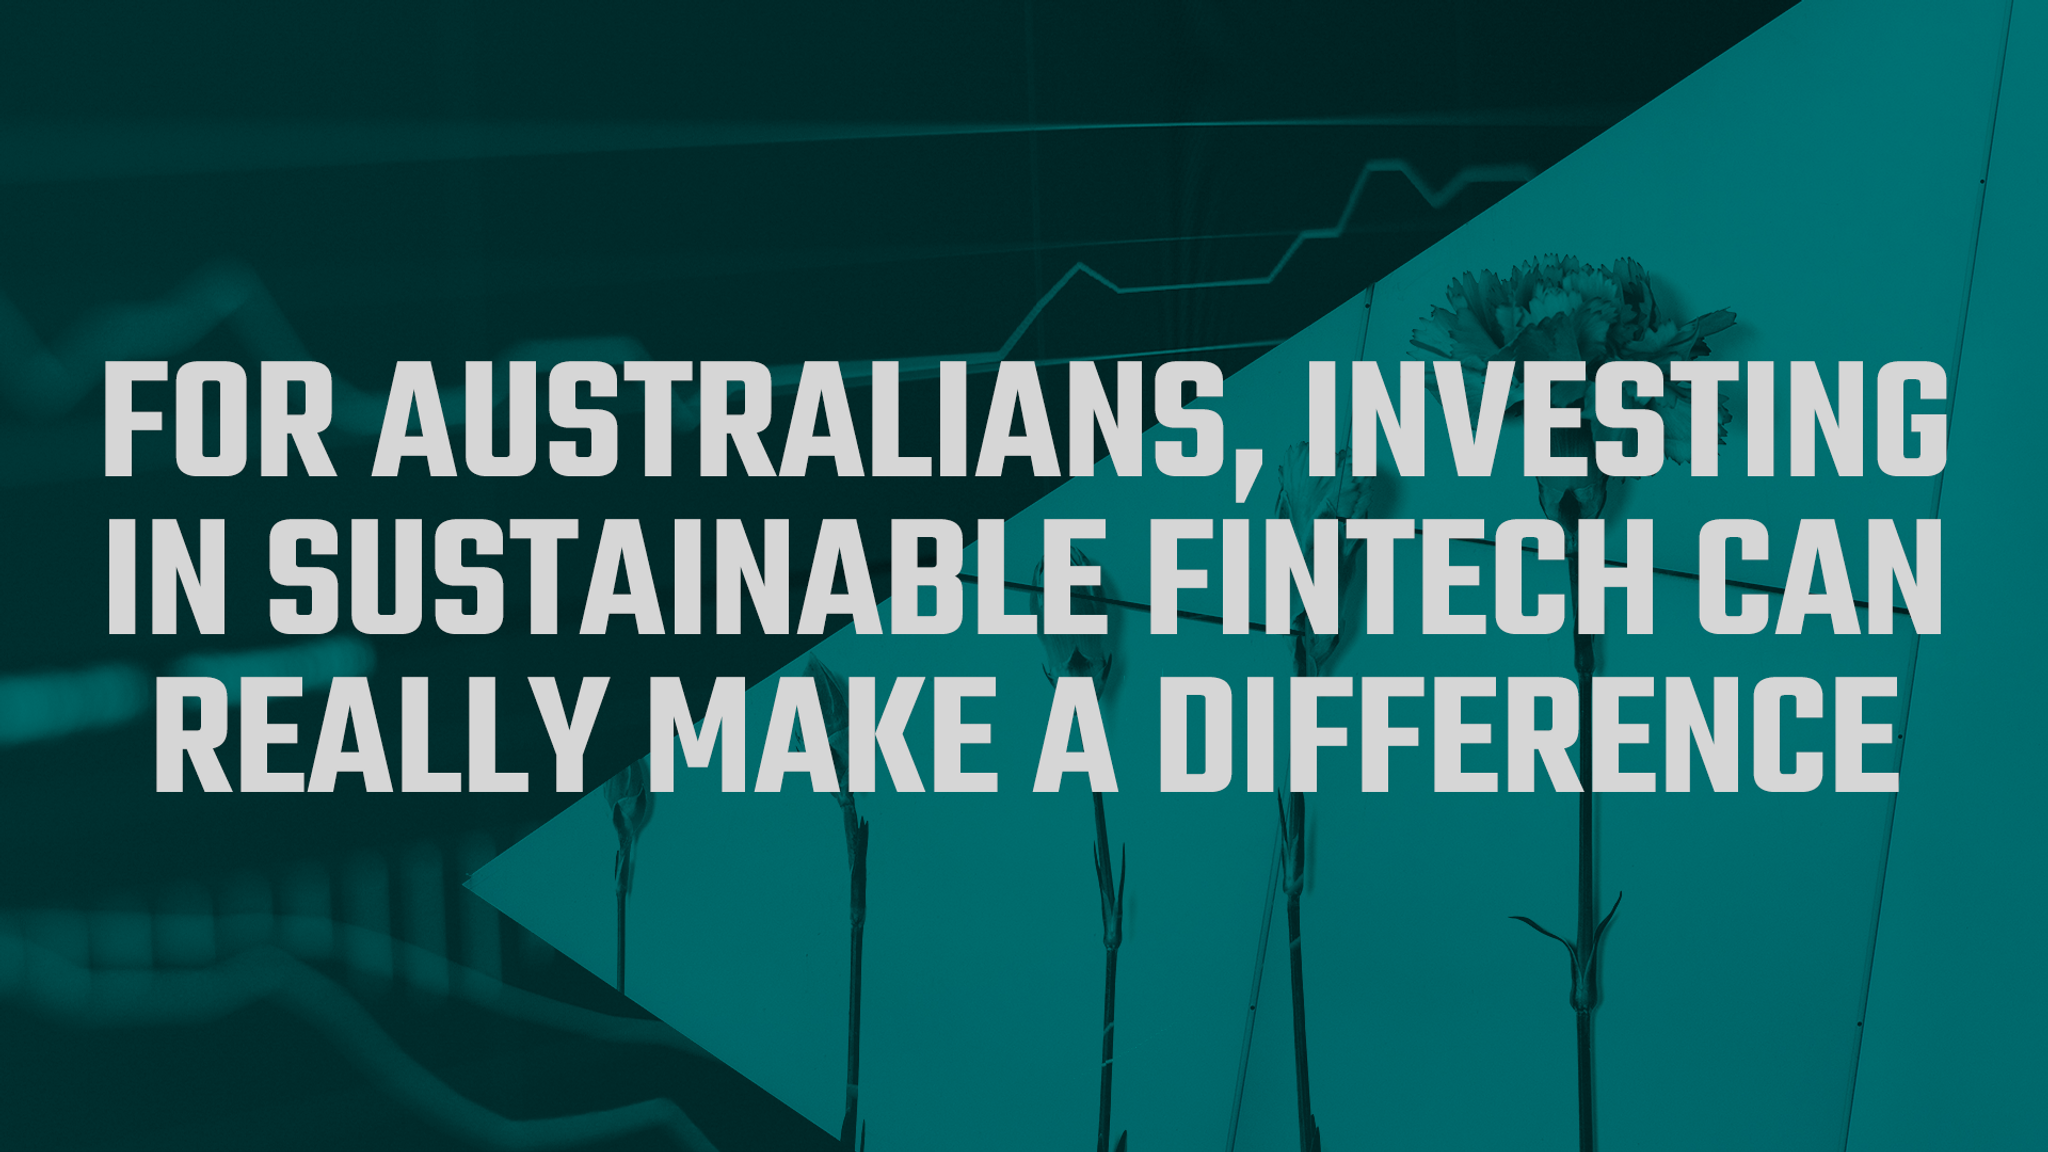 For Australians, investing in sustainable fintech can really make a difference